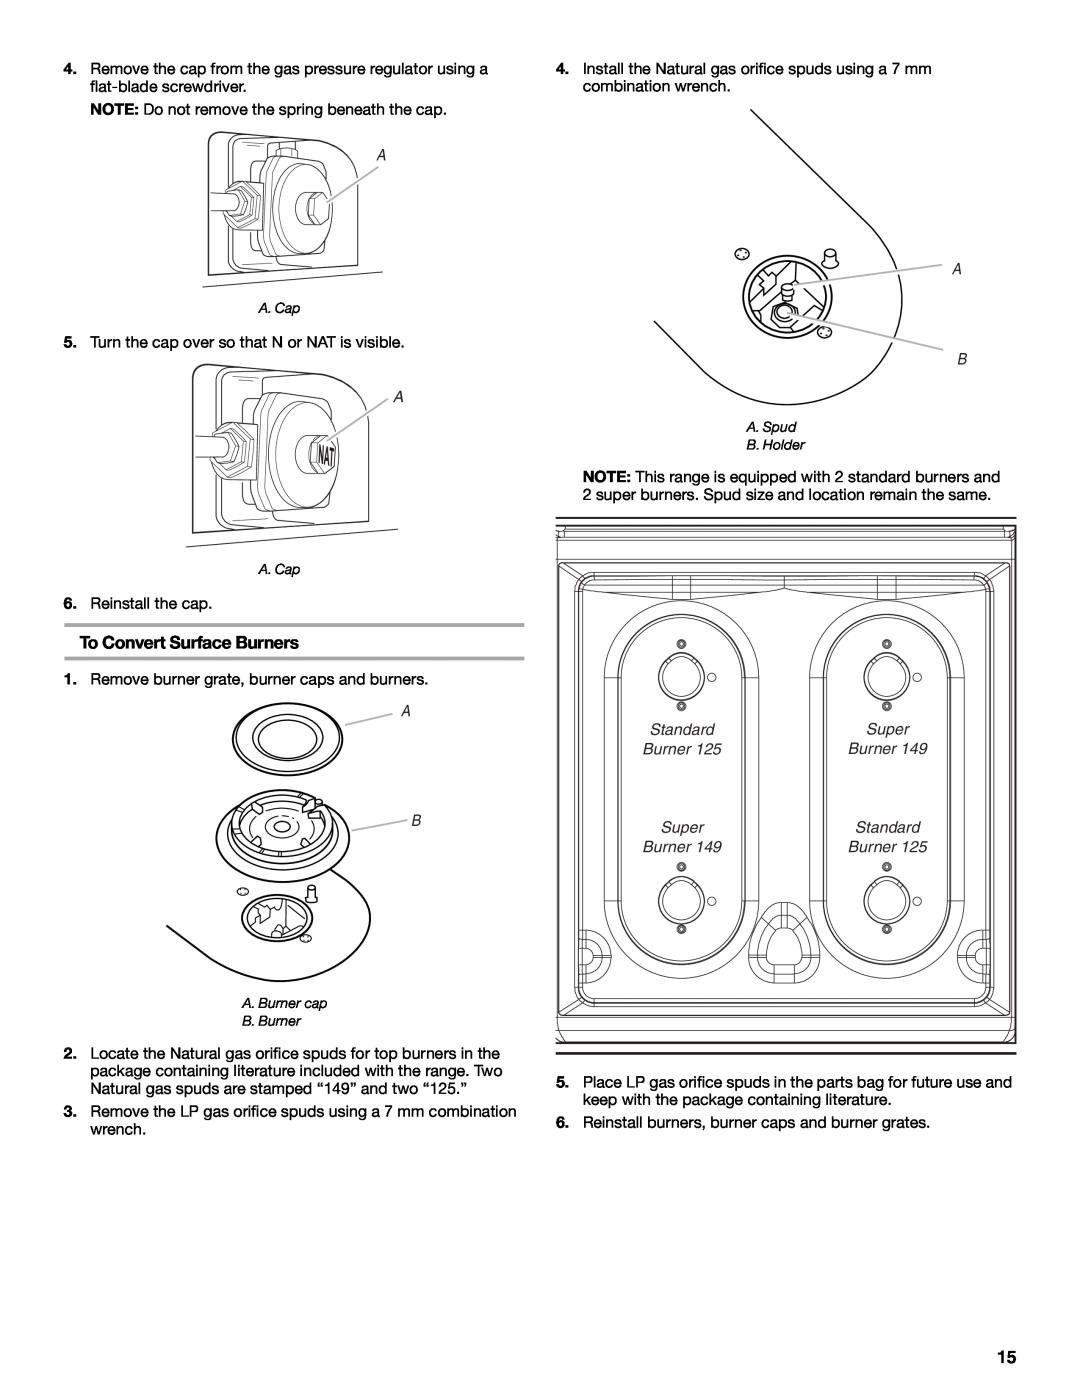 Whirlpool W10459123B installation instructions To Convert Surface Burners 